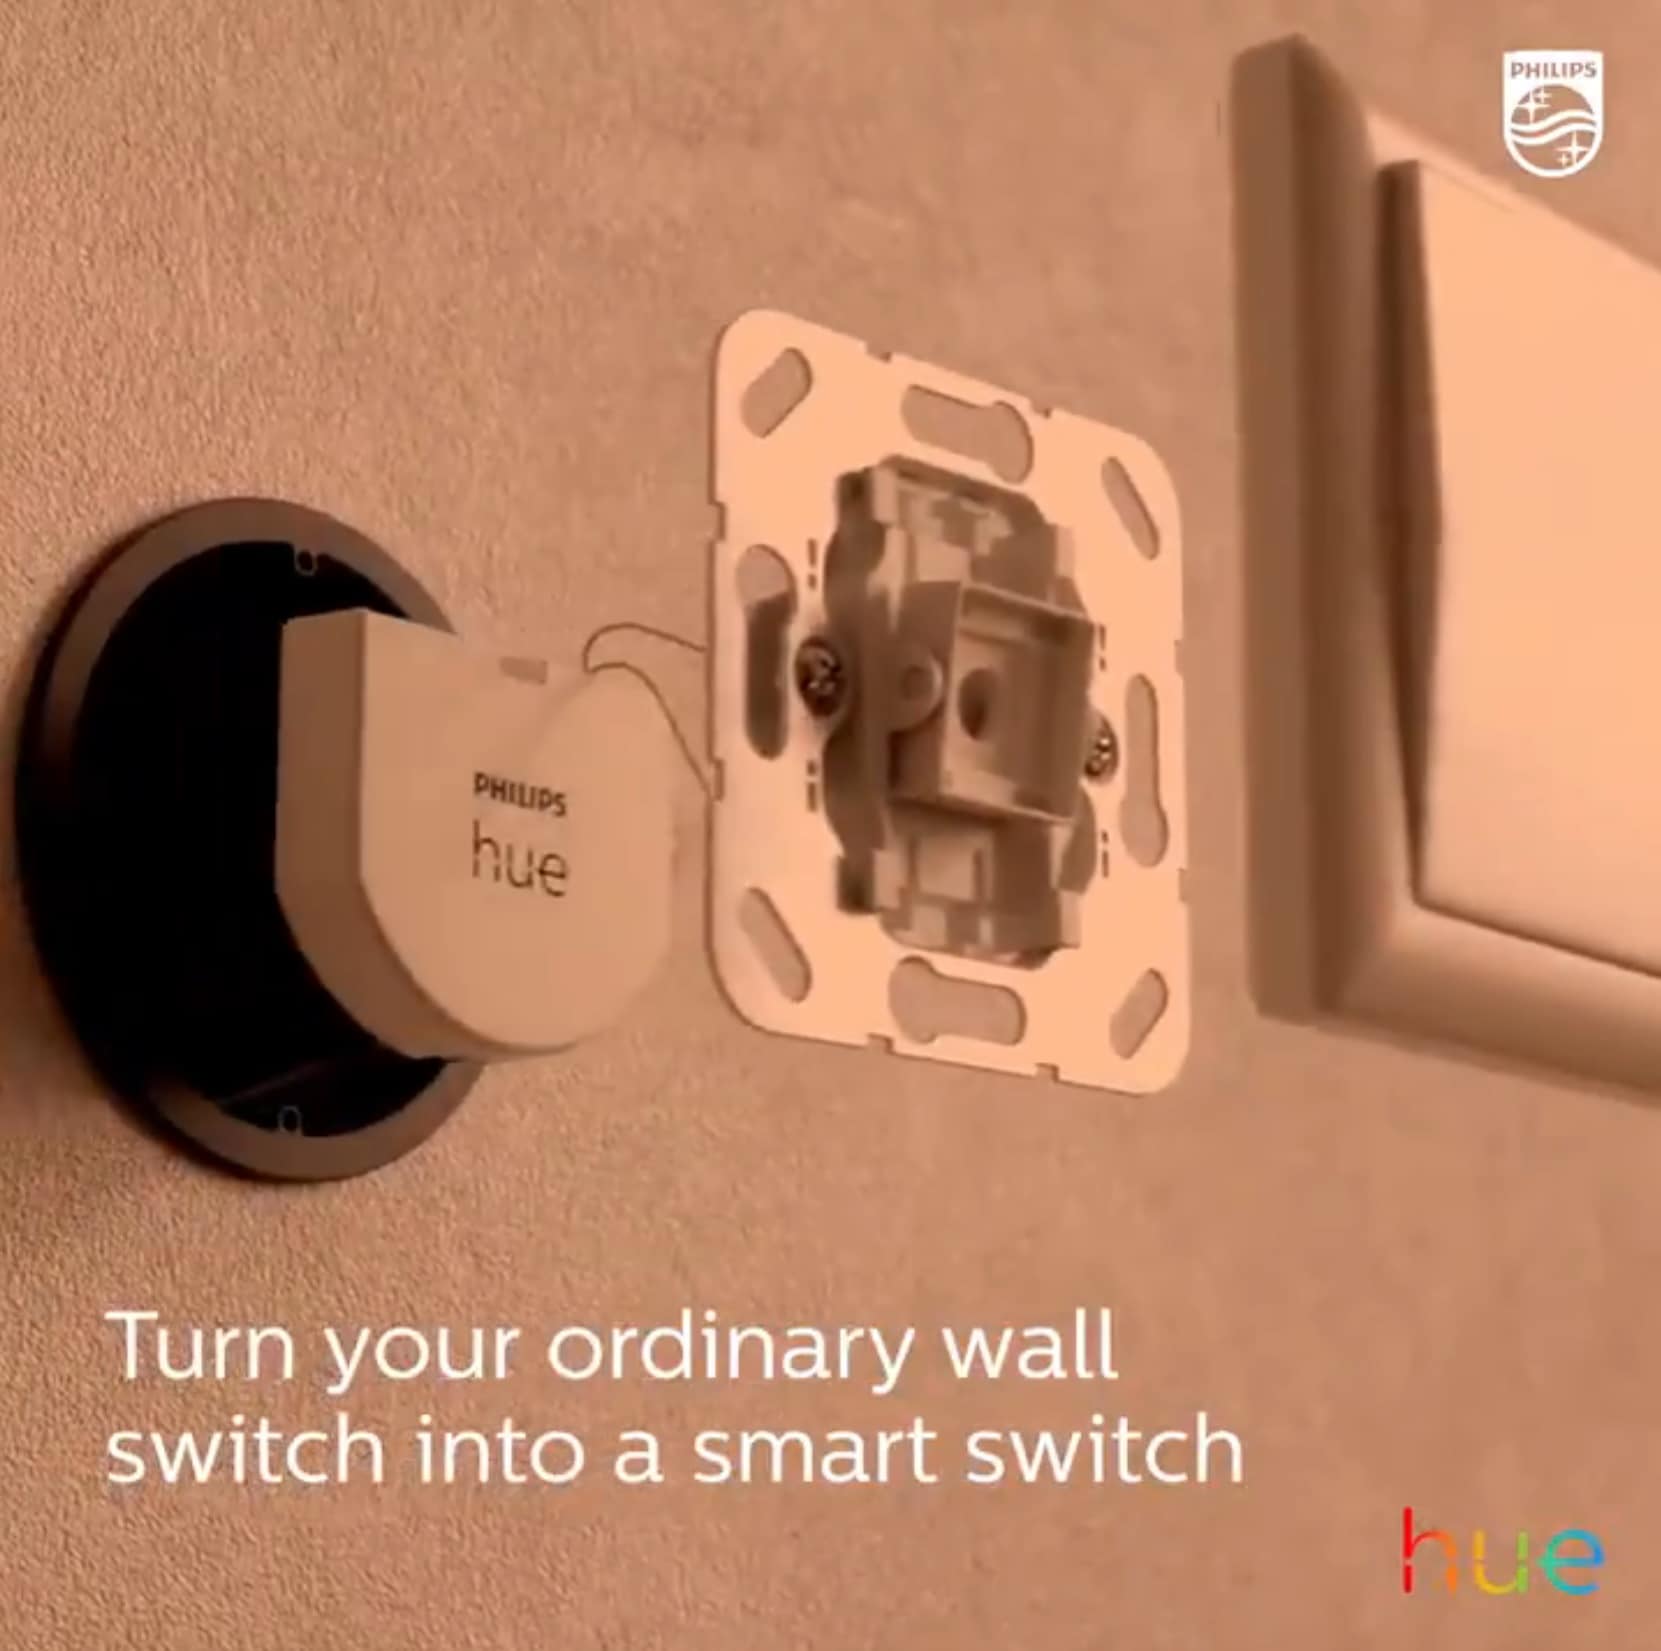 The new Philips Hue wall switch module and upgraded dimmer will let you replace your outdated light switches